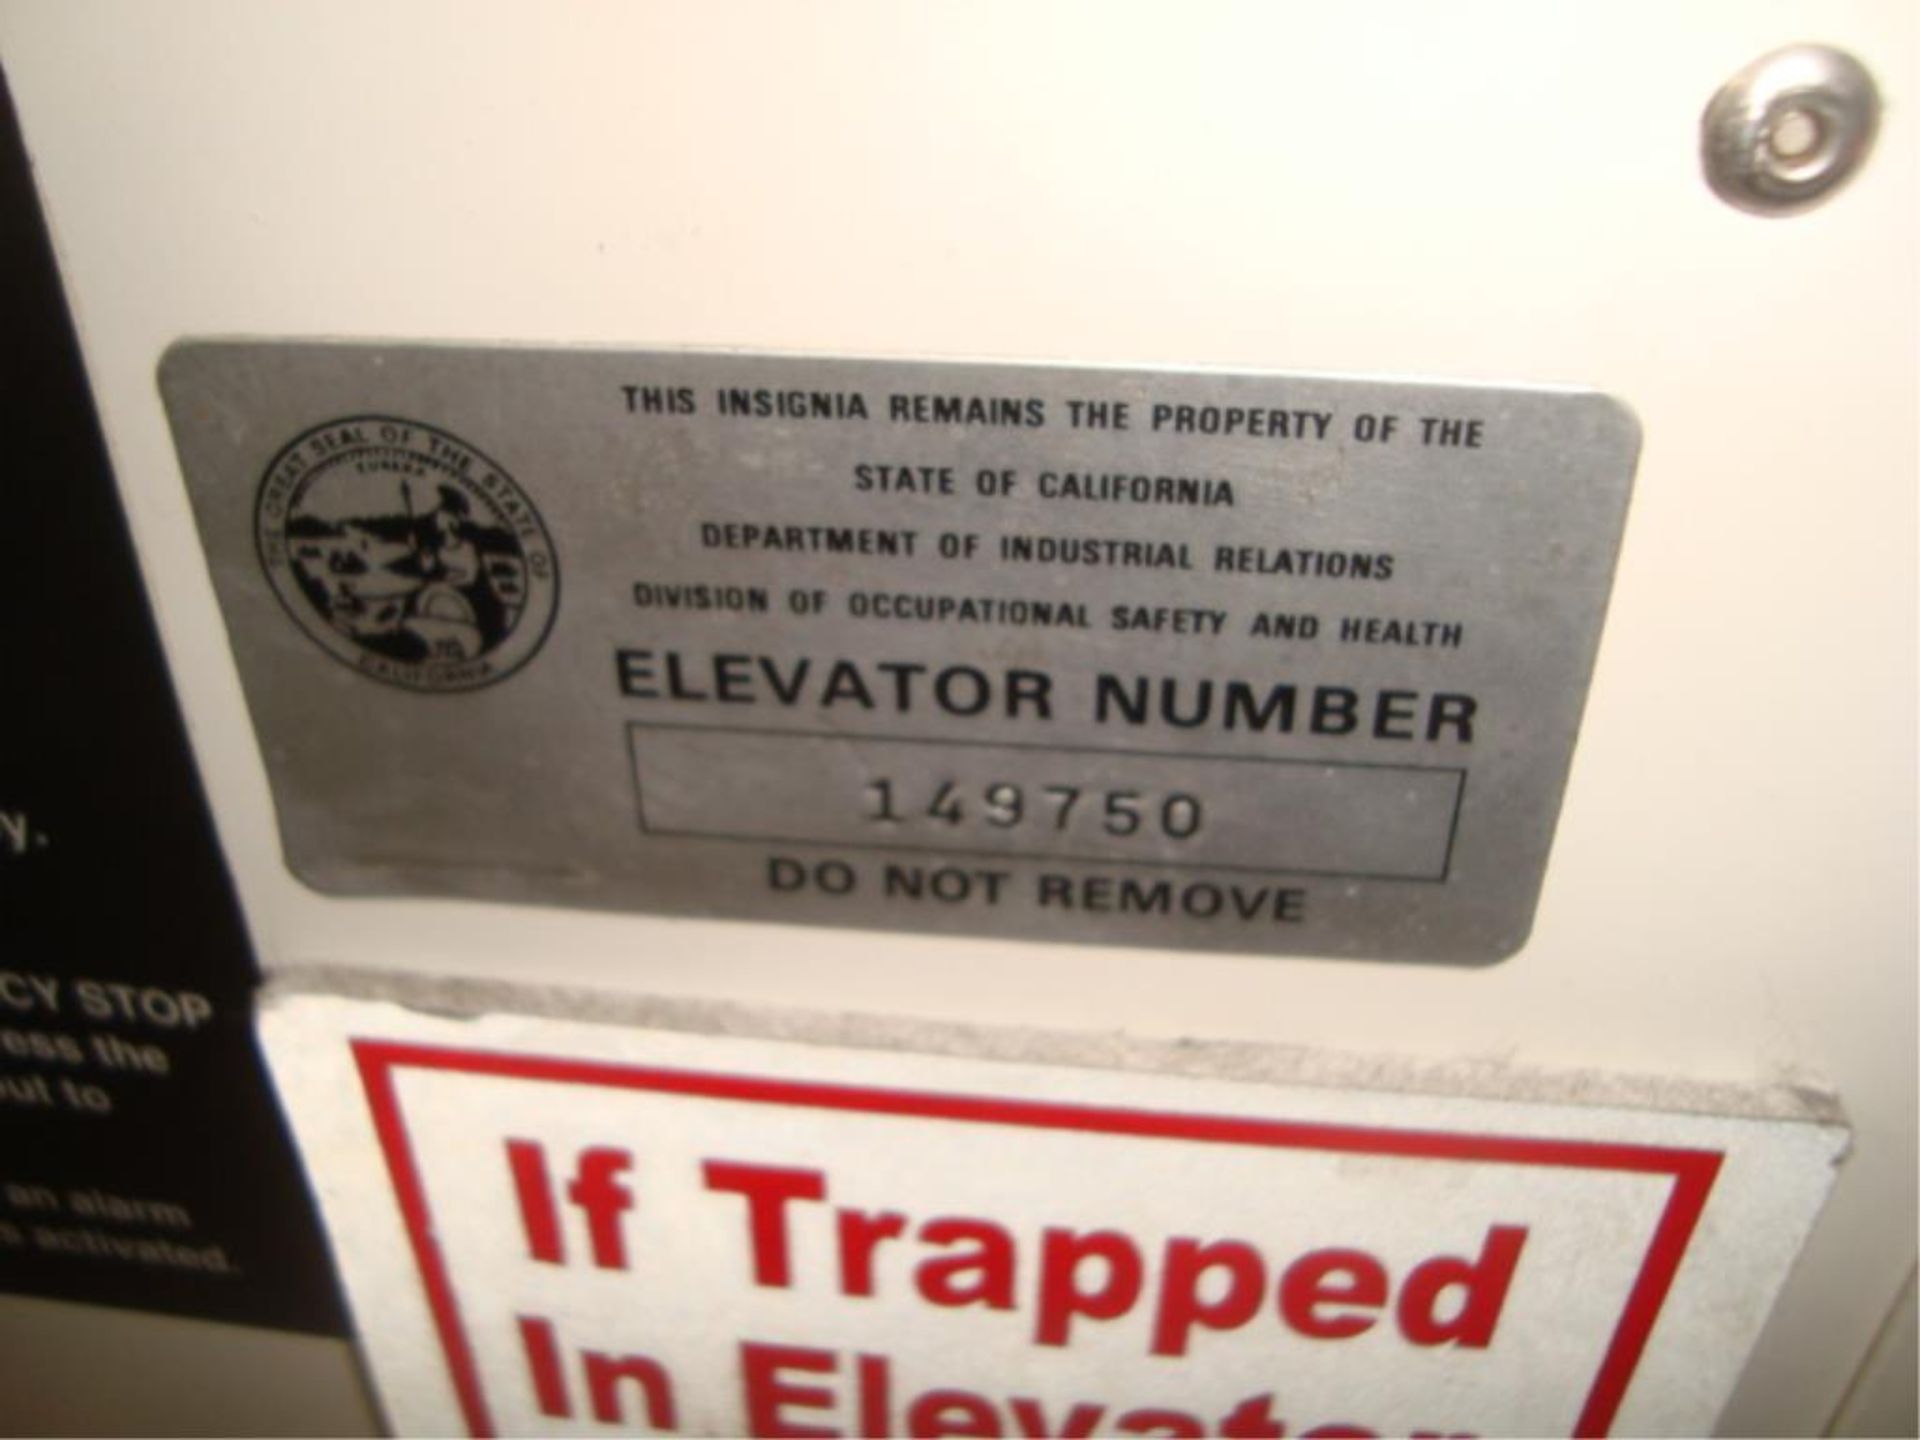 Wheel Chair Access Elevator - Image 6 of 16